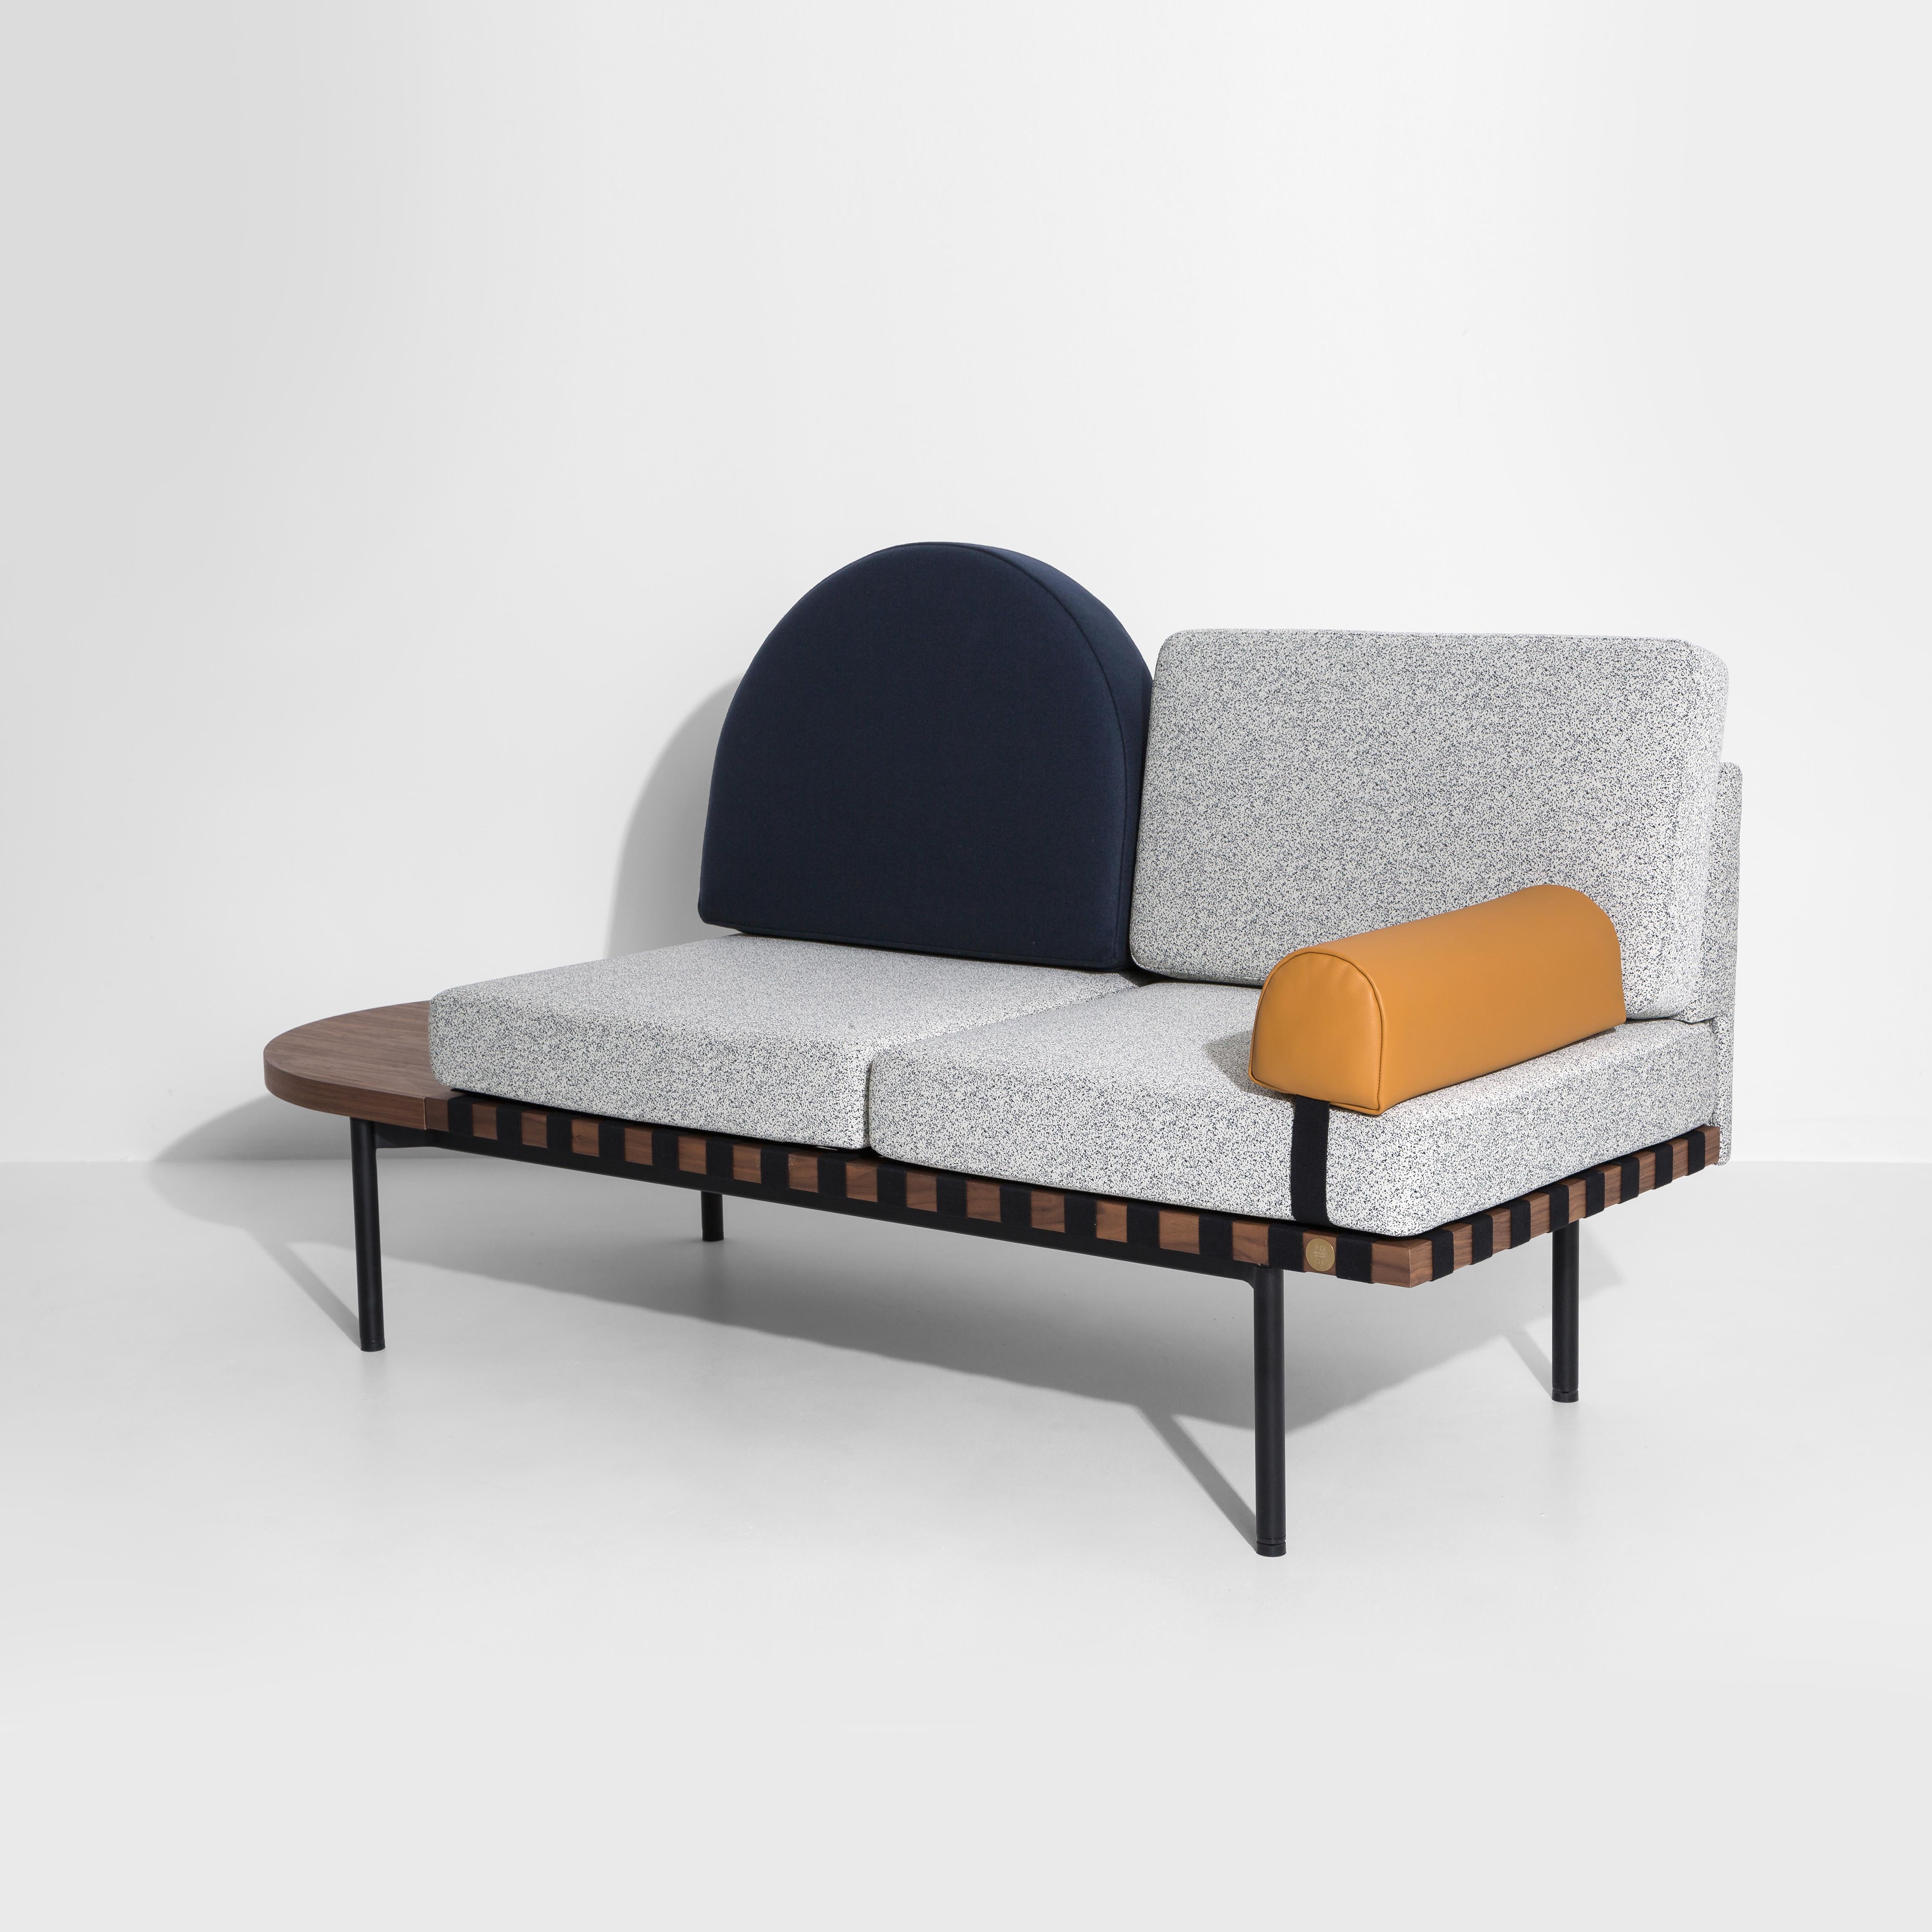 Contemporary Petite Friture Grid Daybed in Blue-White Upholstery by Studio Pool, 2015 For Sale